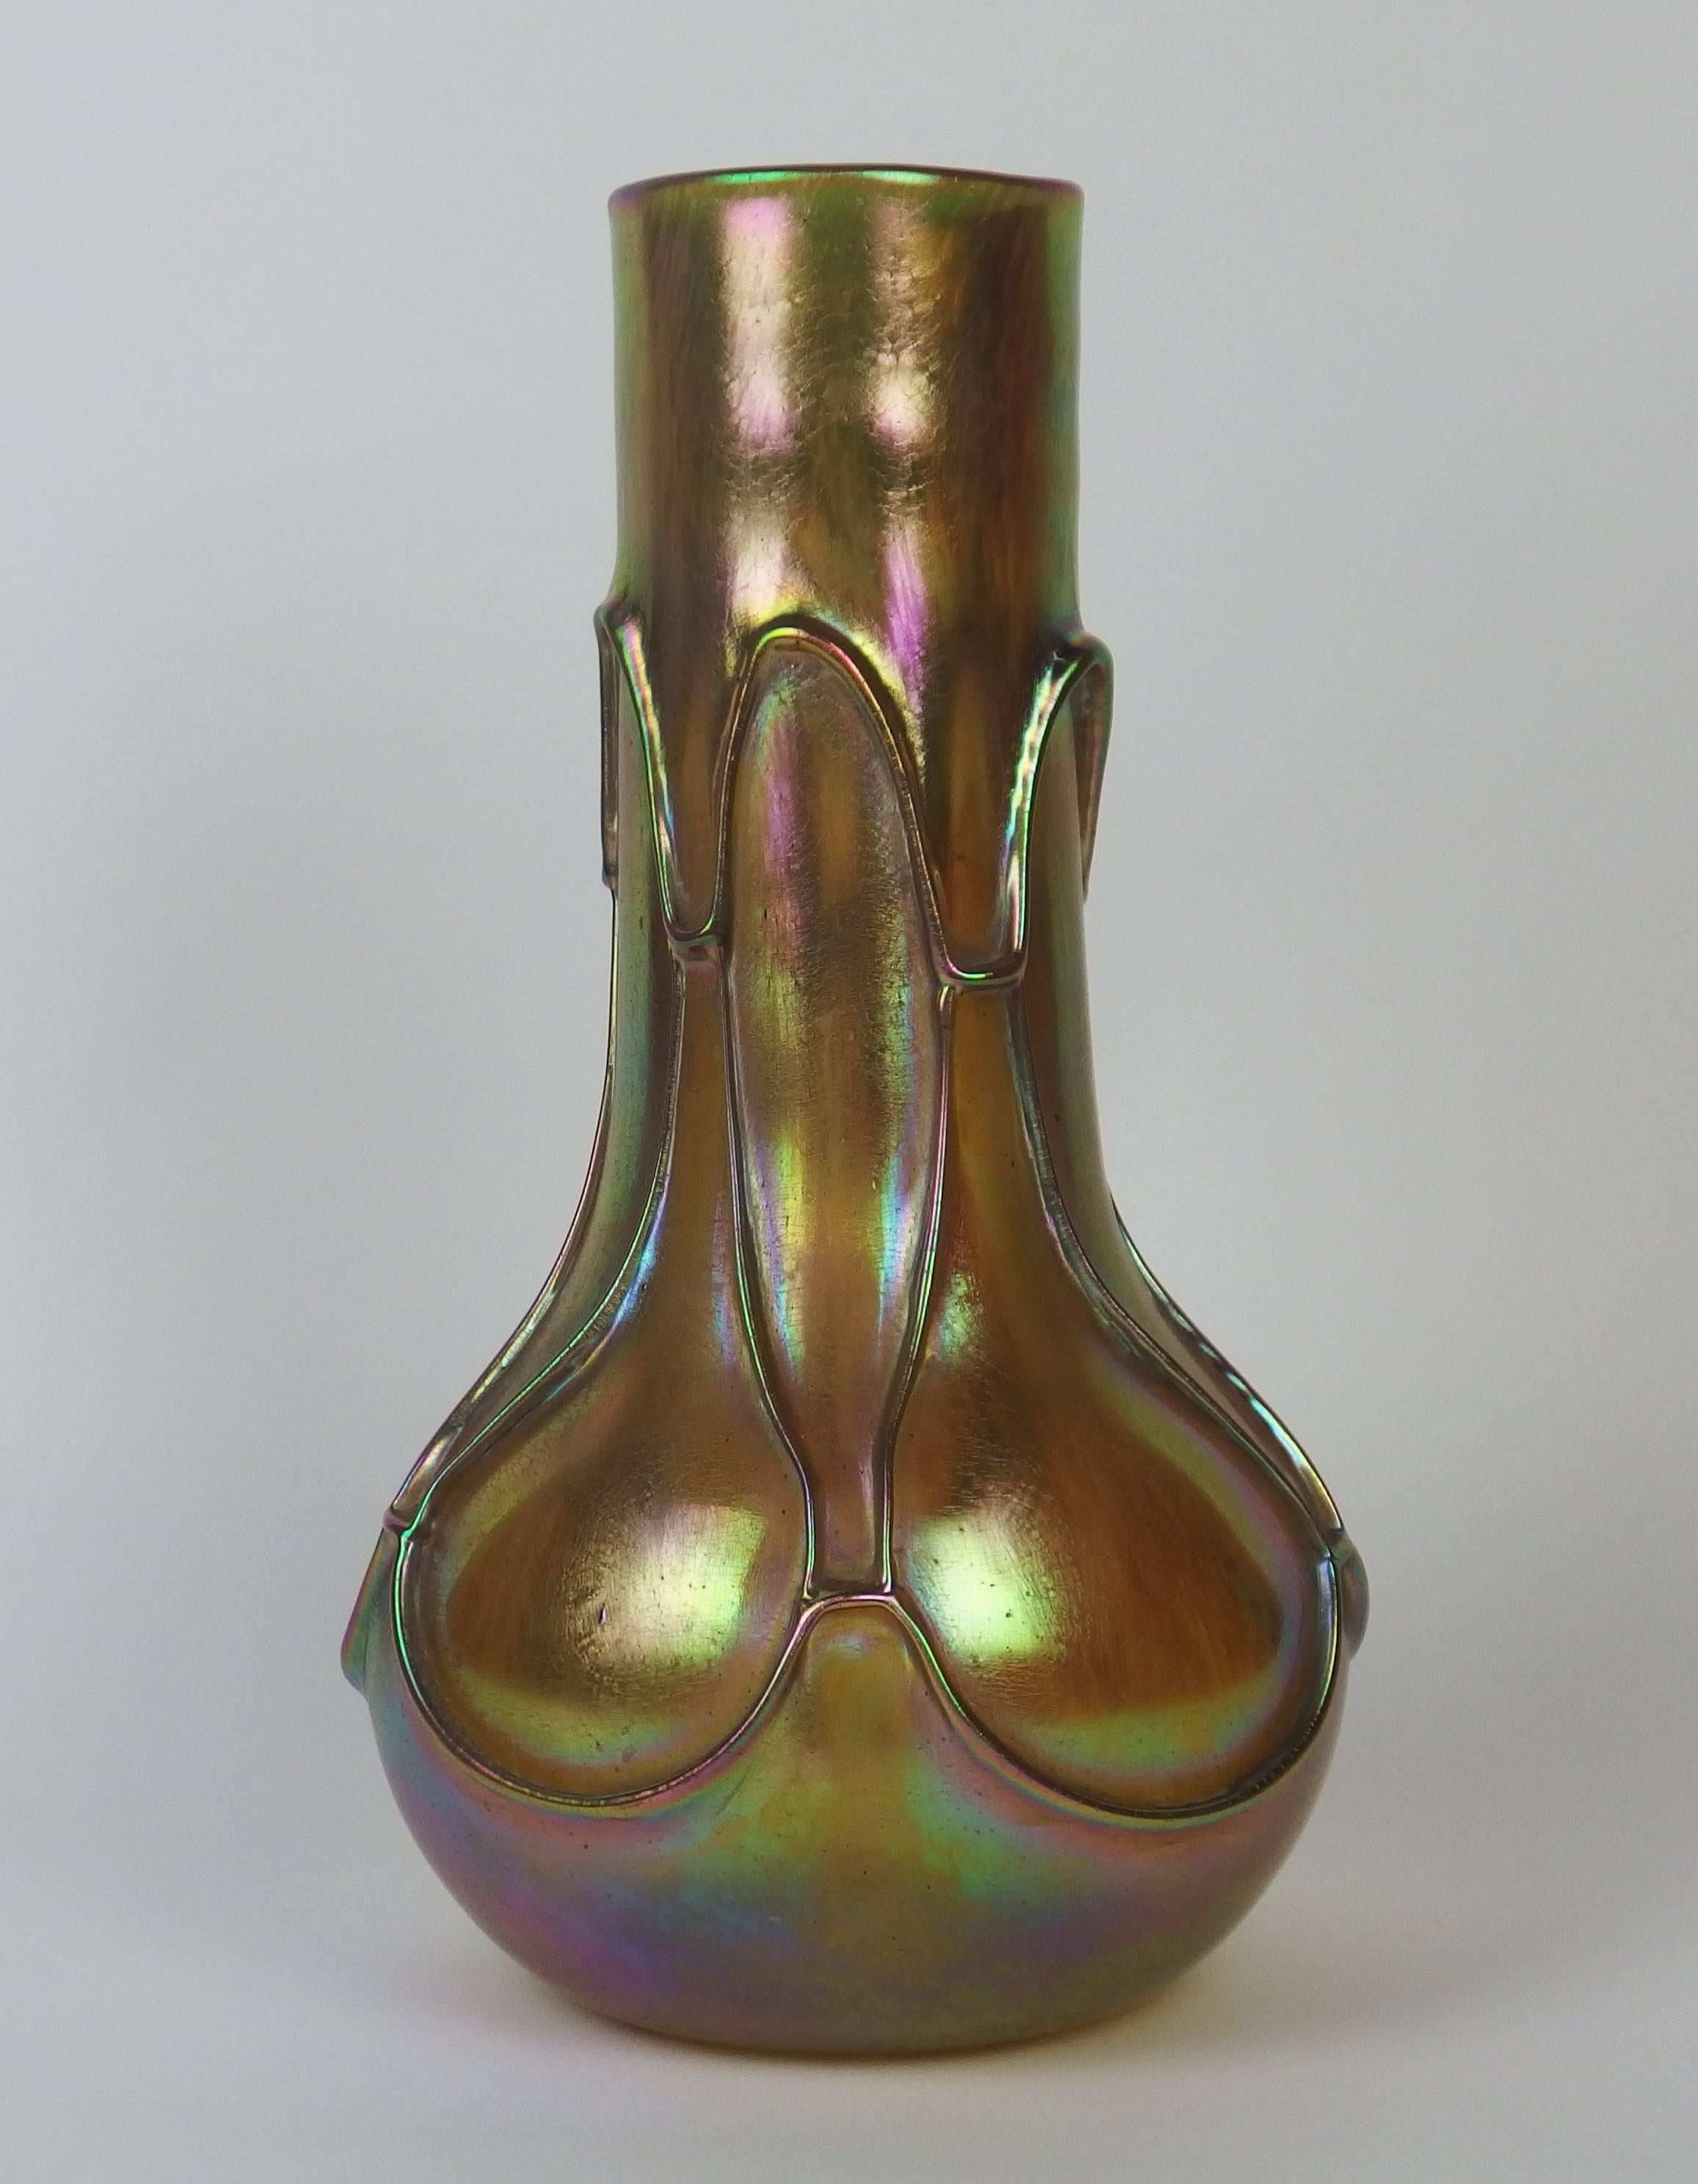 Rare phaenomen genre Loetz vase with applied network of thick projecting threads in chain on candia ground, iridescent gilt finish. Unsigned.